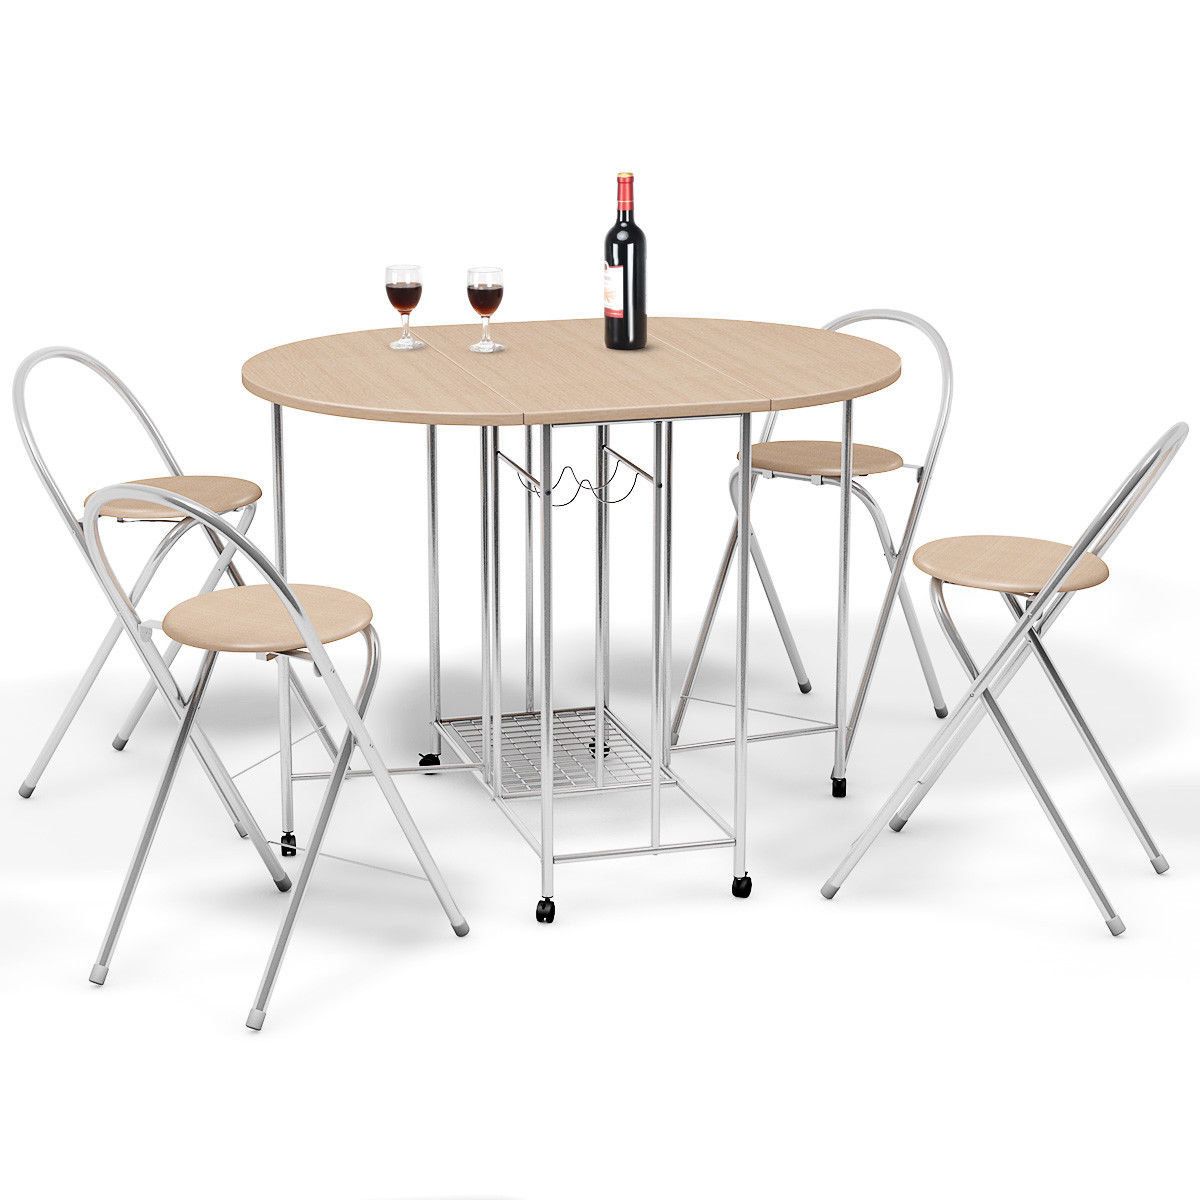 Holderman 5 Piece Counter Height Extendable Dining Set Regarding Latest Honoria 3 Piece Dining Sets (View 13 of 20)